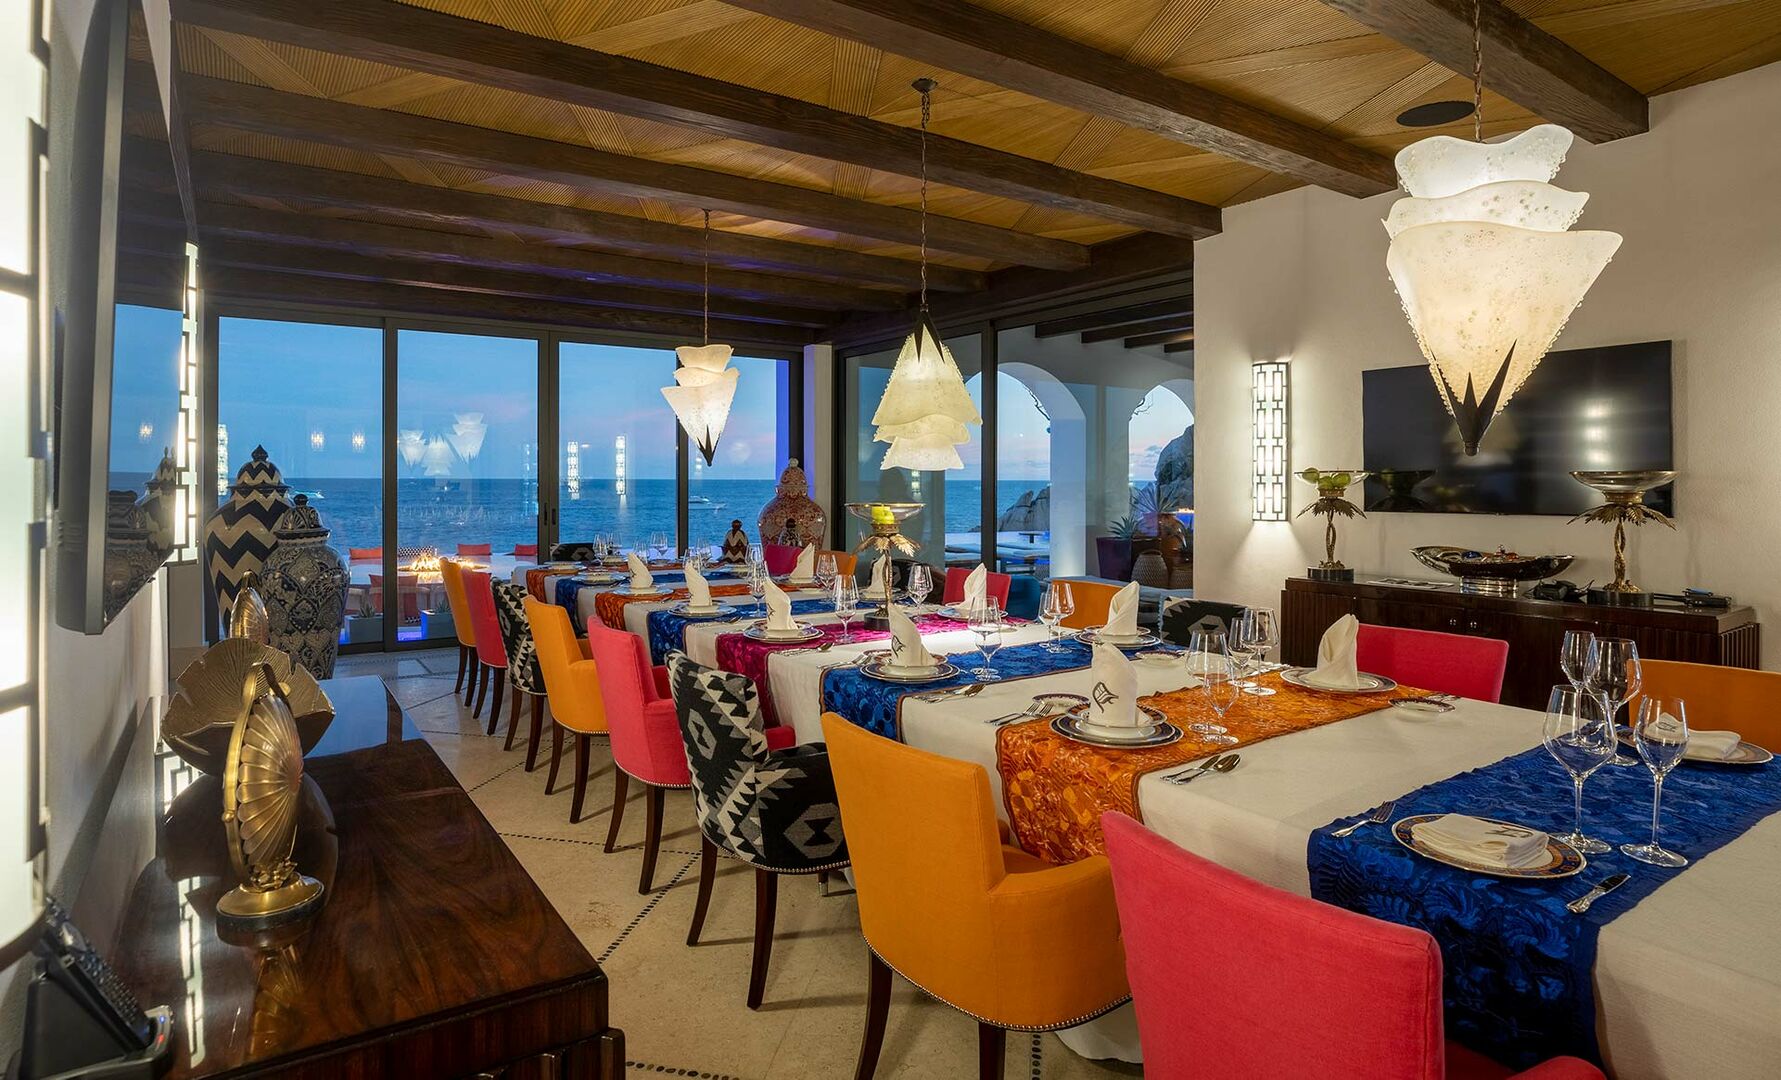 The dining area of this Los Cabos beachfront rental, with a long table and seating for over 20.